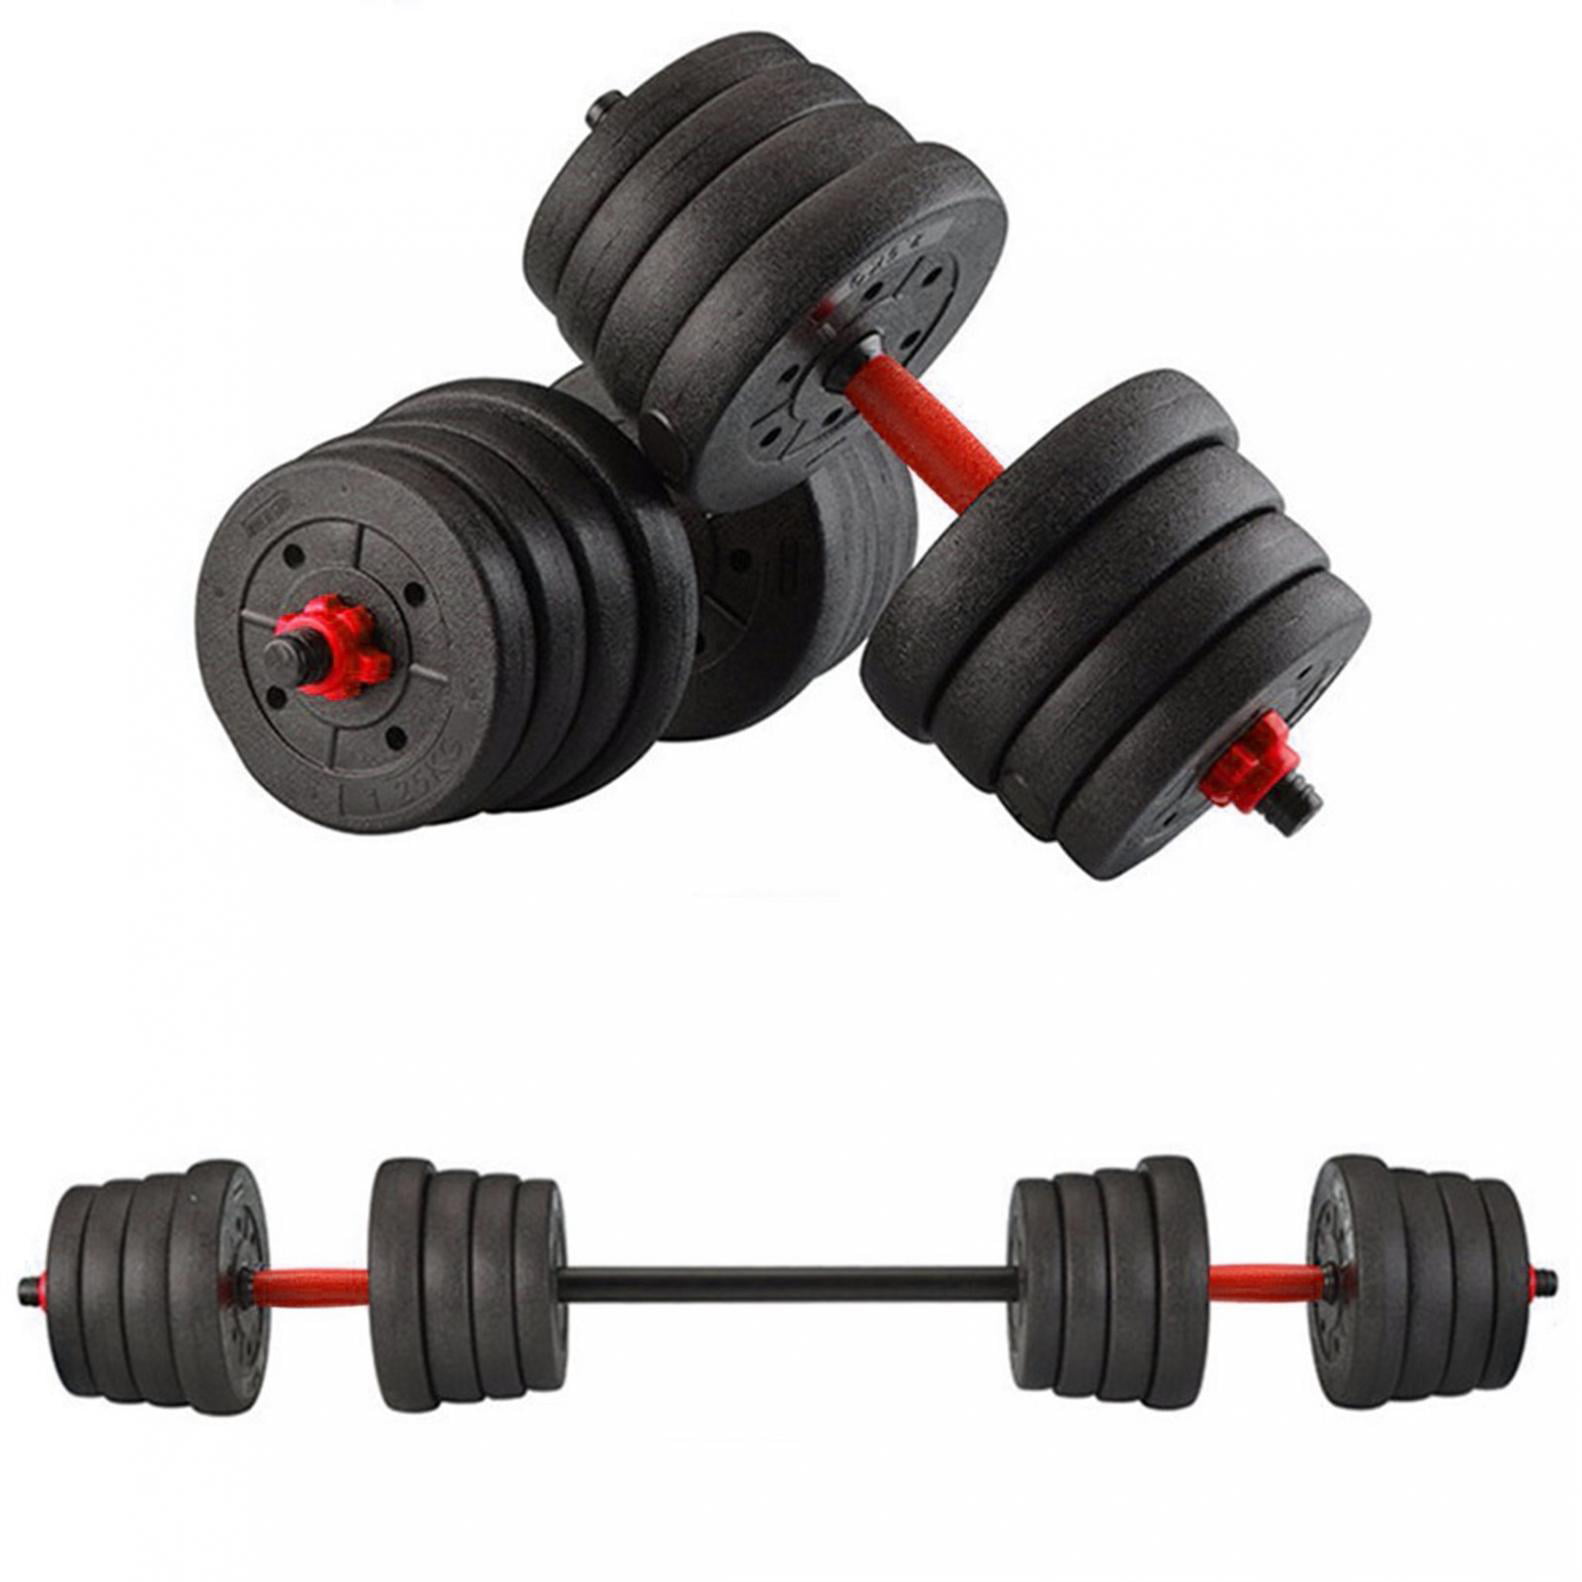 Details about   GYM Adjustable Dumbbell Set 66lb Weight Barbell Plates Home Workout Fitness Gym 